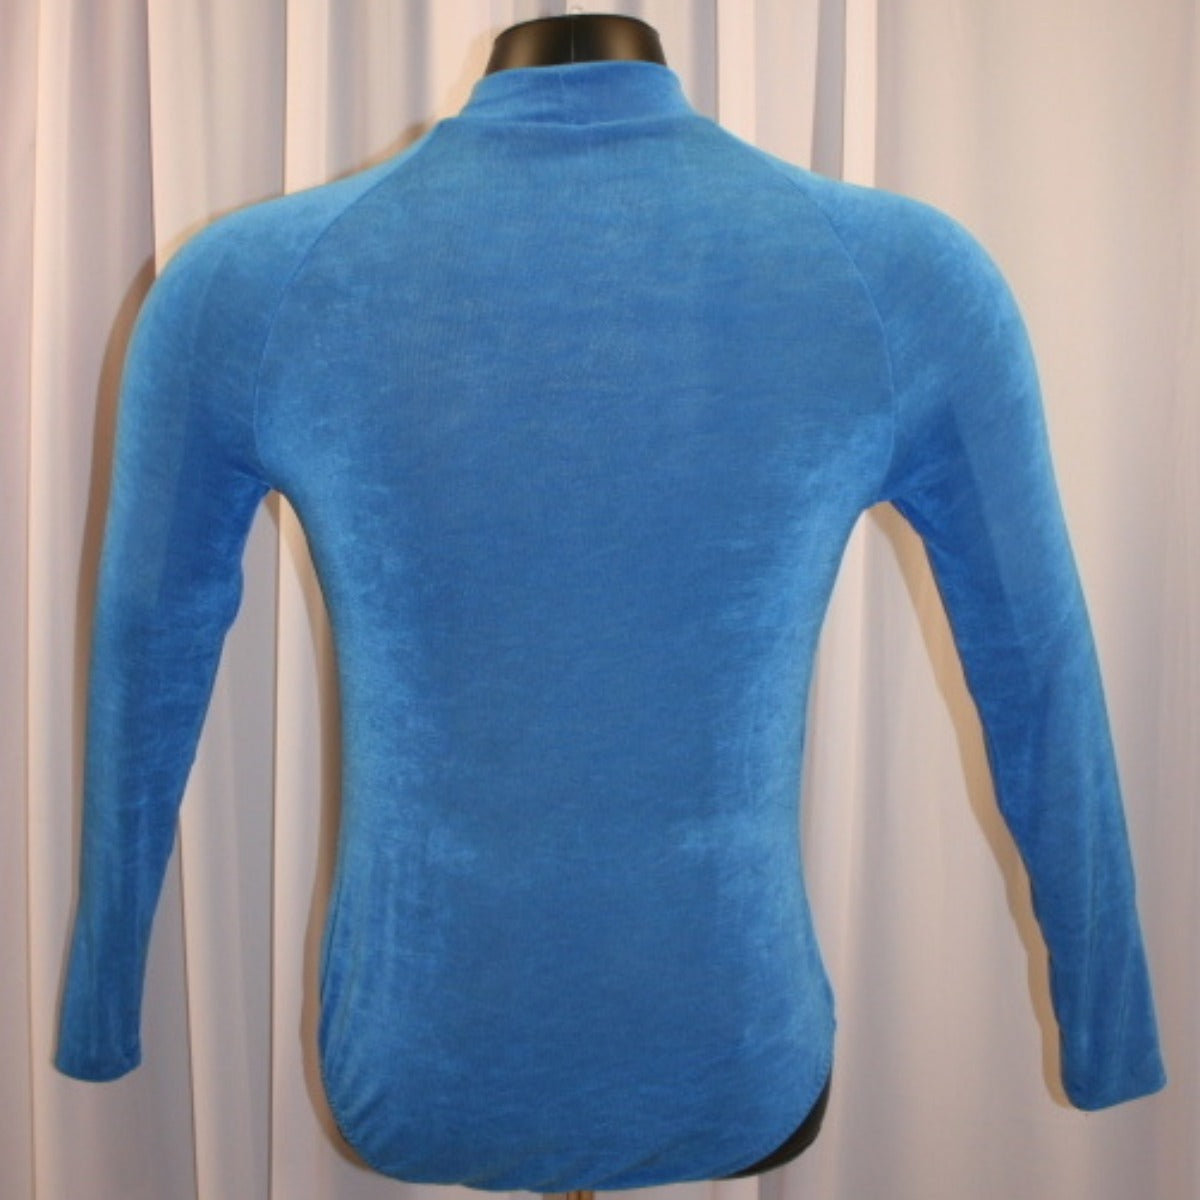 Crystal's Creations back view of men's blue Latin shirt